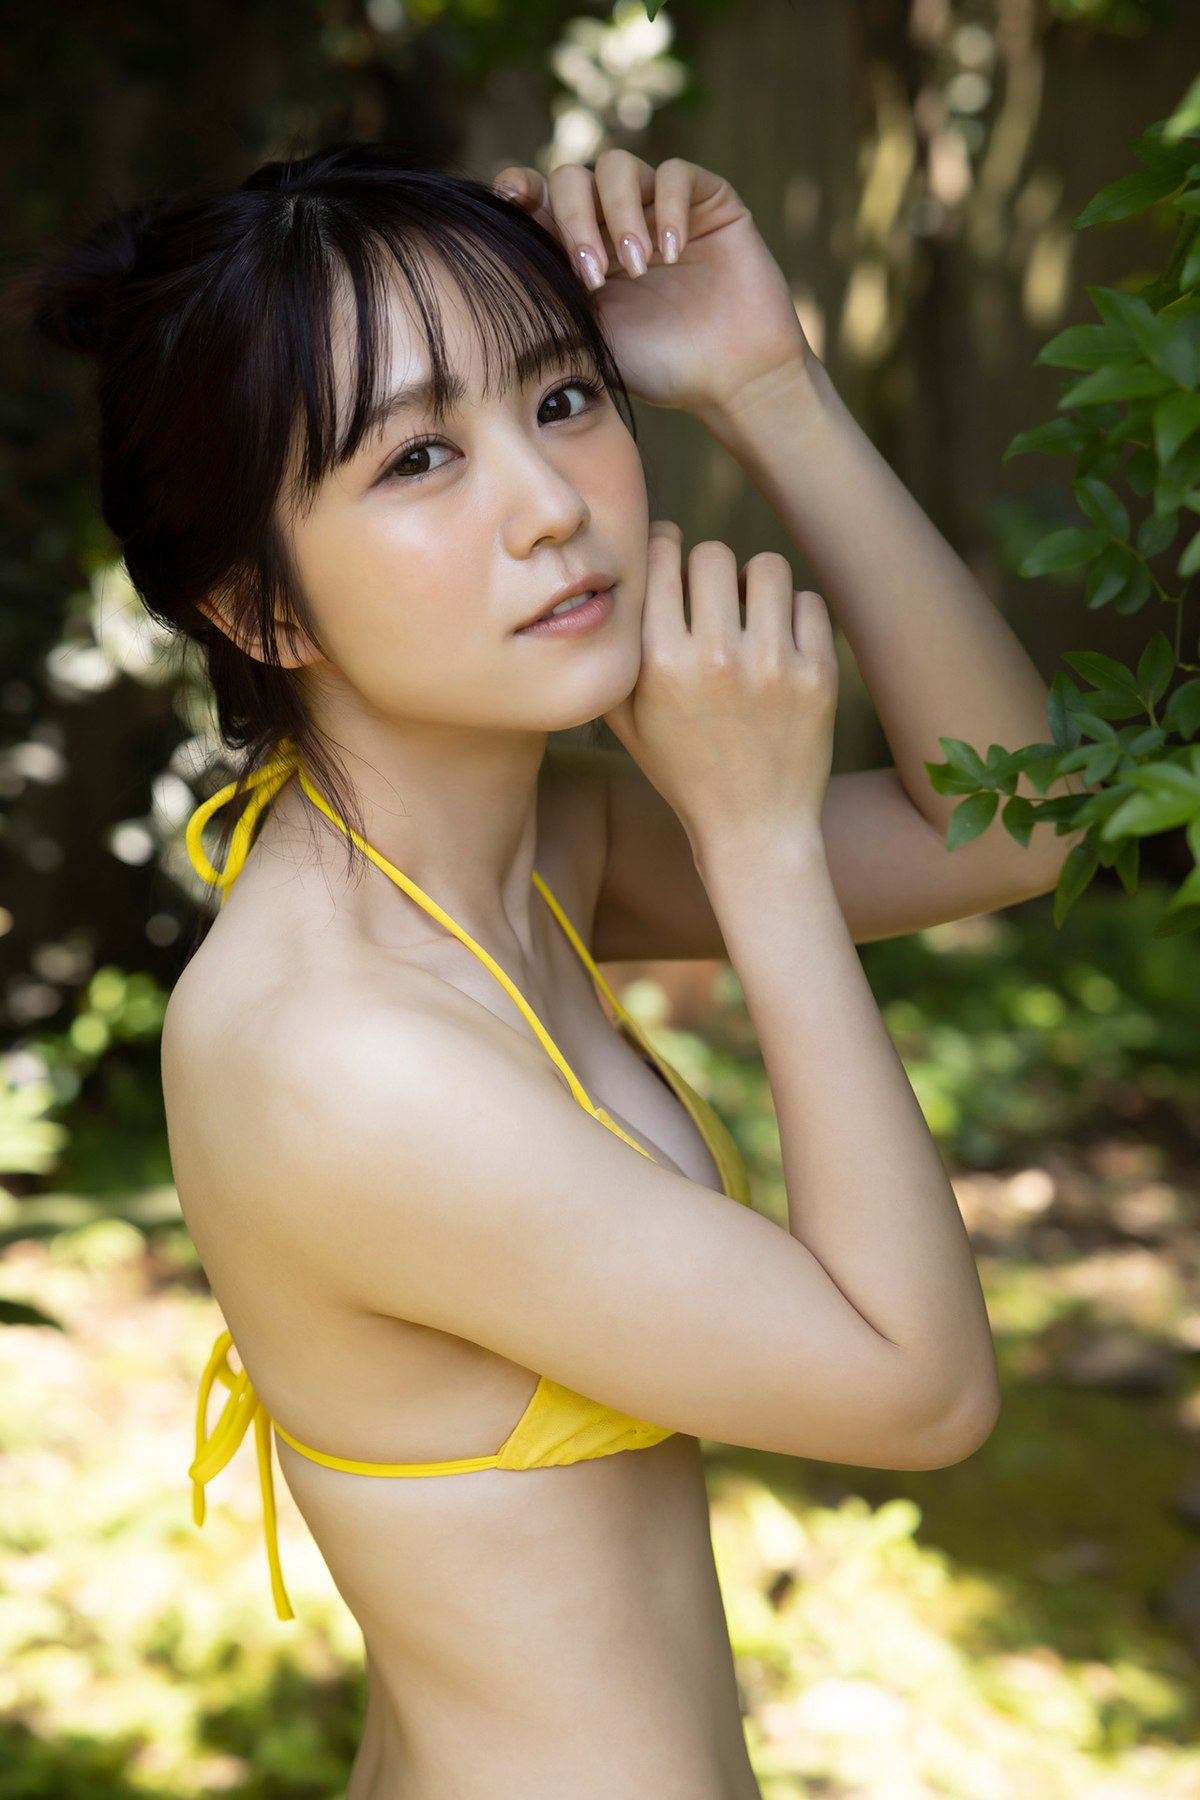 FLASH Photobook 2023 06 20 Tsumugi Hashimoto 橋本つむぎ The Best In Osaka Is The Best In Japan 0066 5430743325.jpg